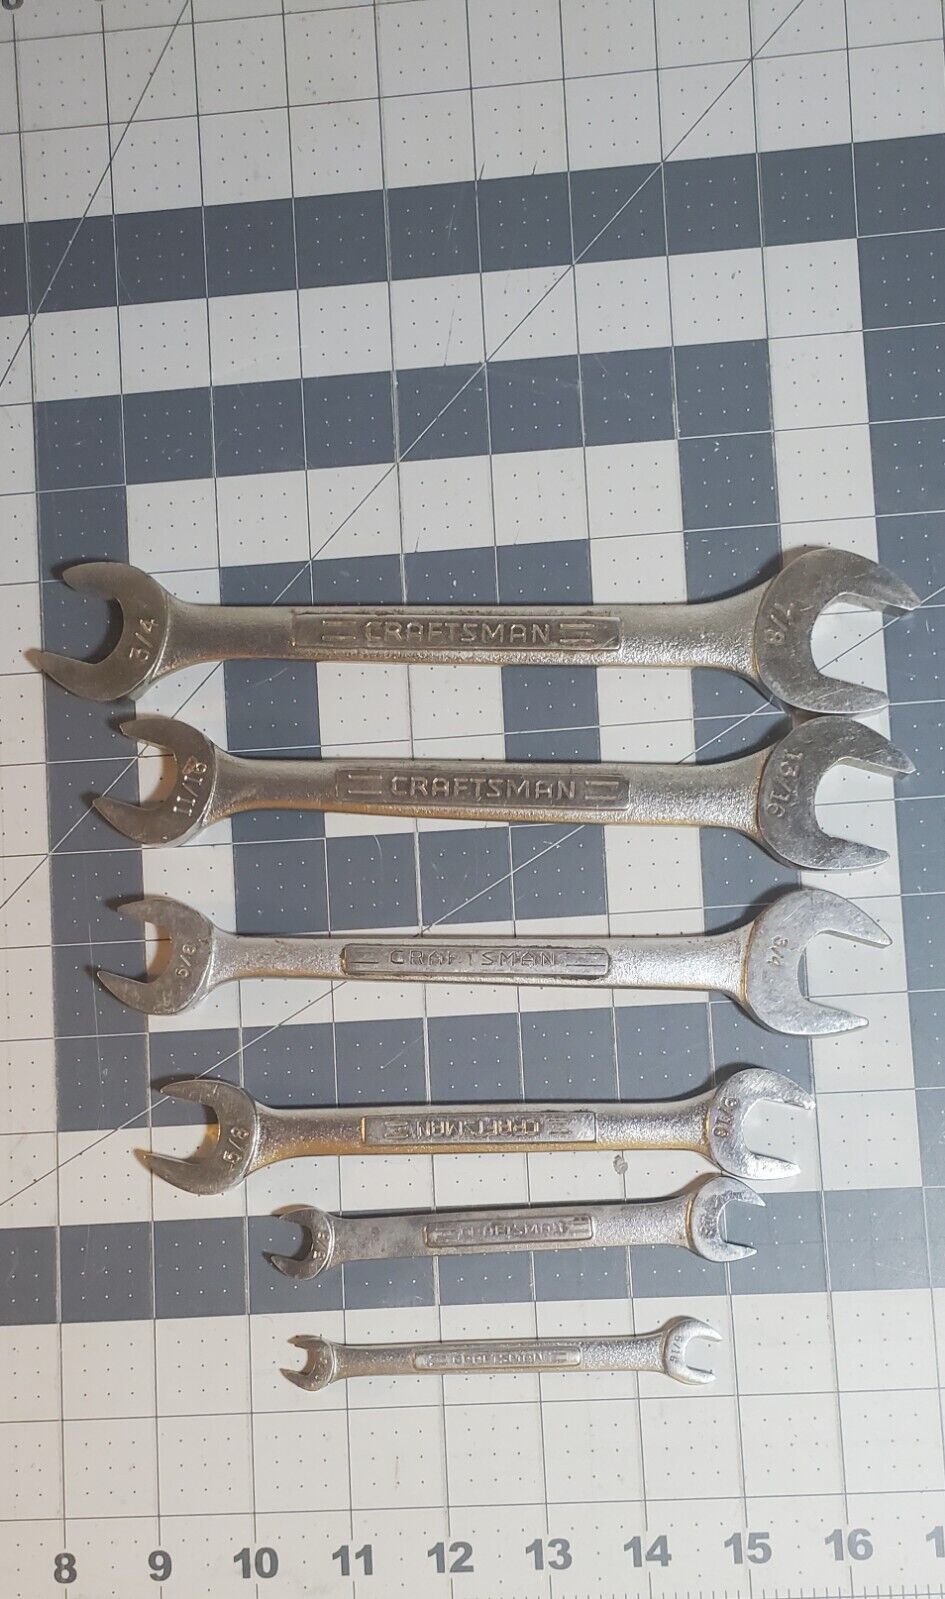 Craftsman 6 Piece Open End Wrench Set Preowned - $28.05